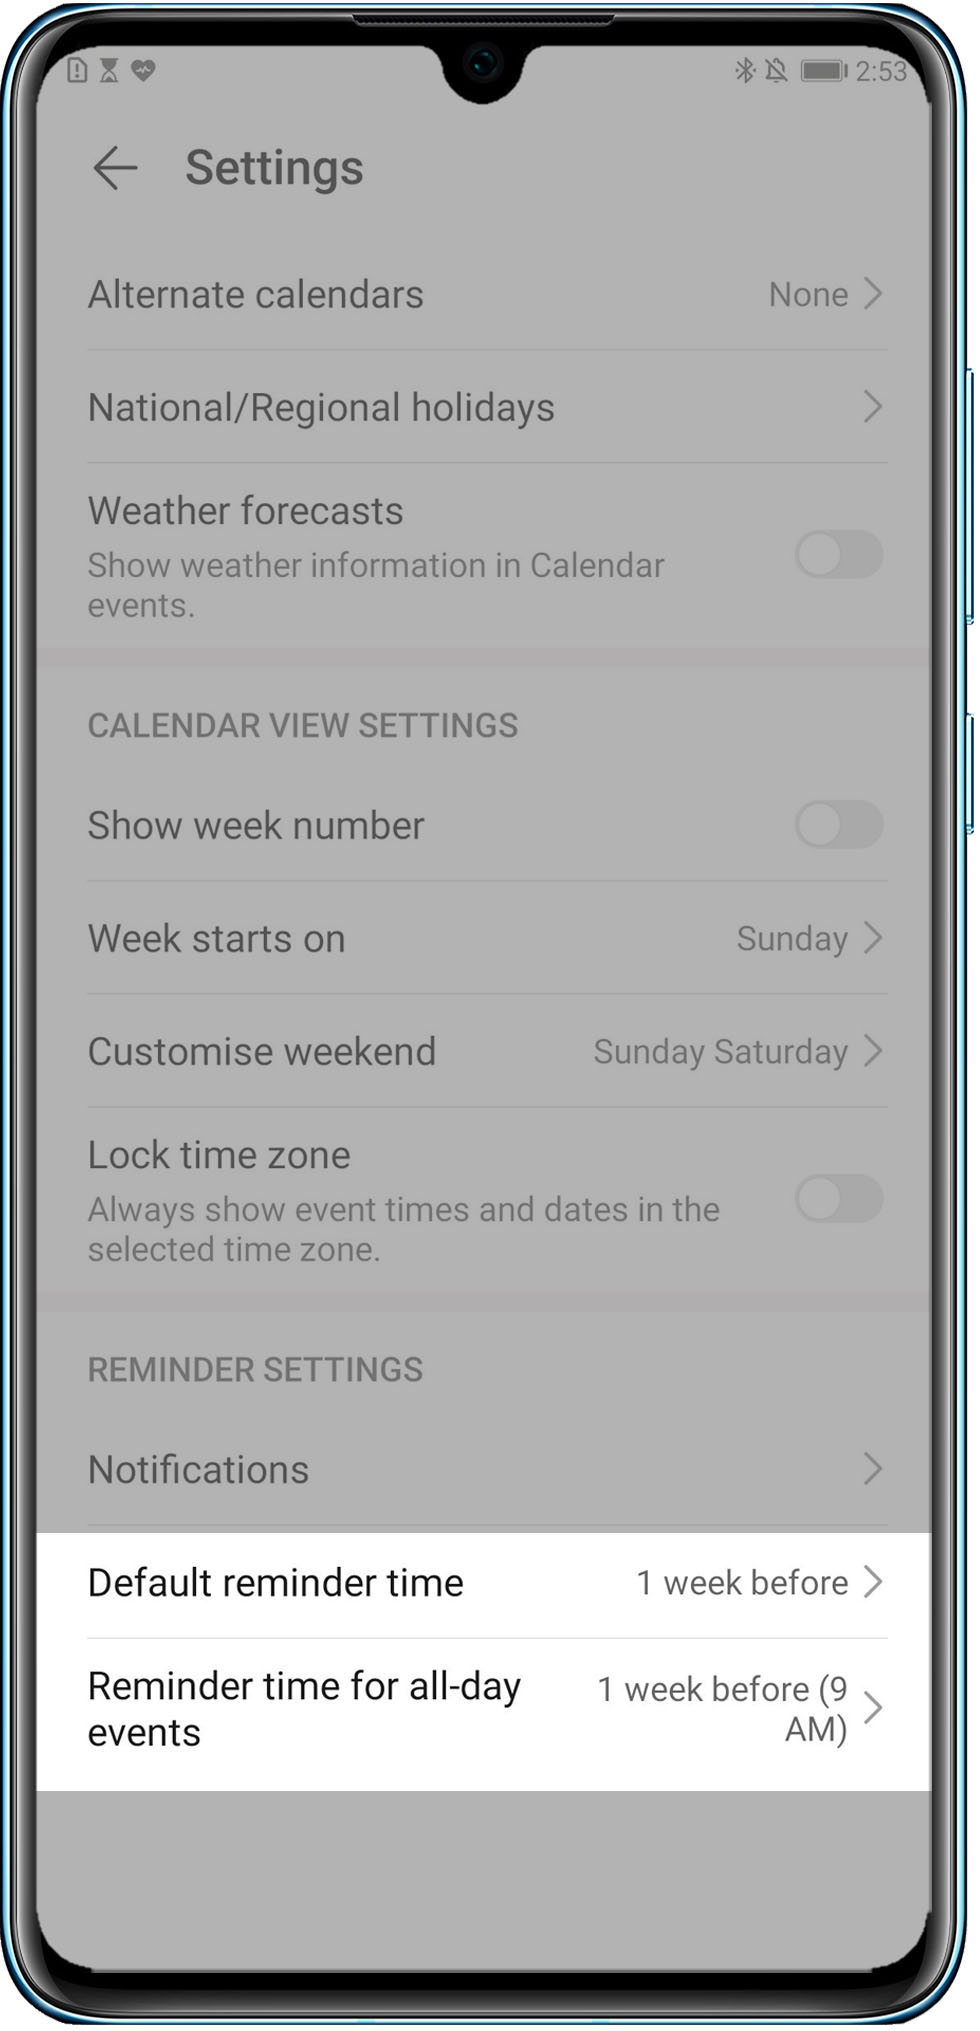 A reminder is sent one week in advance for an event in HUAWEI Calendar